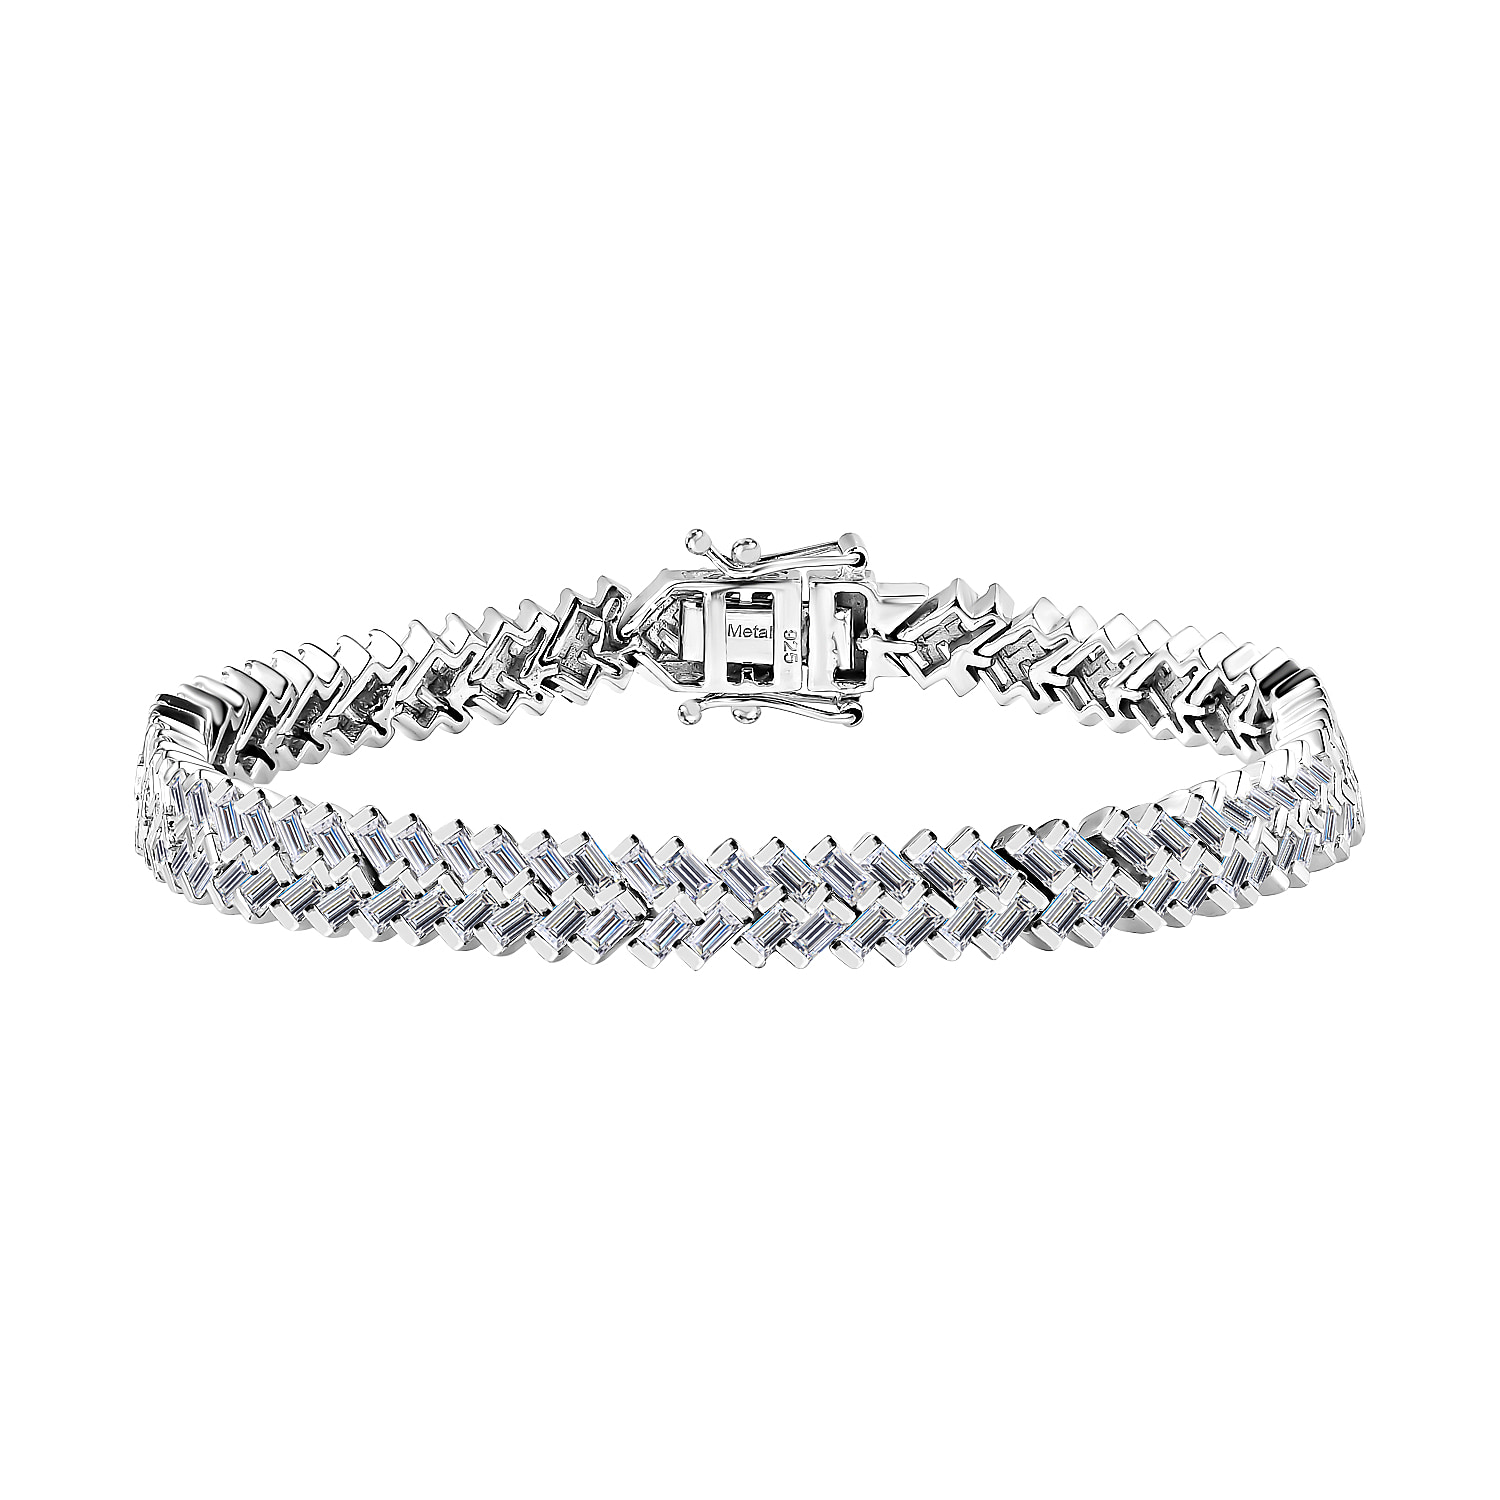 First Time Ever - Moissanite Legacy Tennis Bracelet (Size - 7.5) in Platinum Overlay Sterling Silver 7.65 Ct, Silver Wt. 21.28 GM